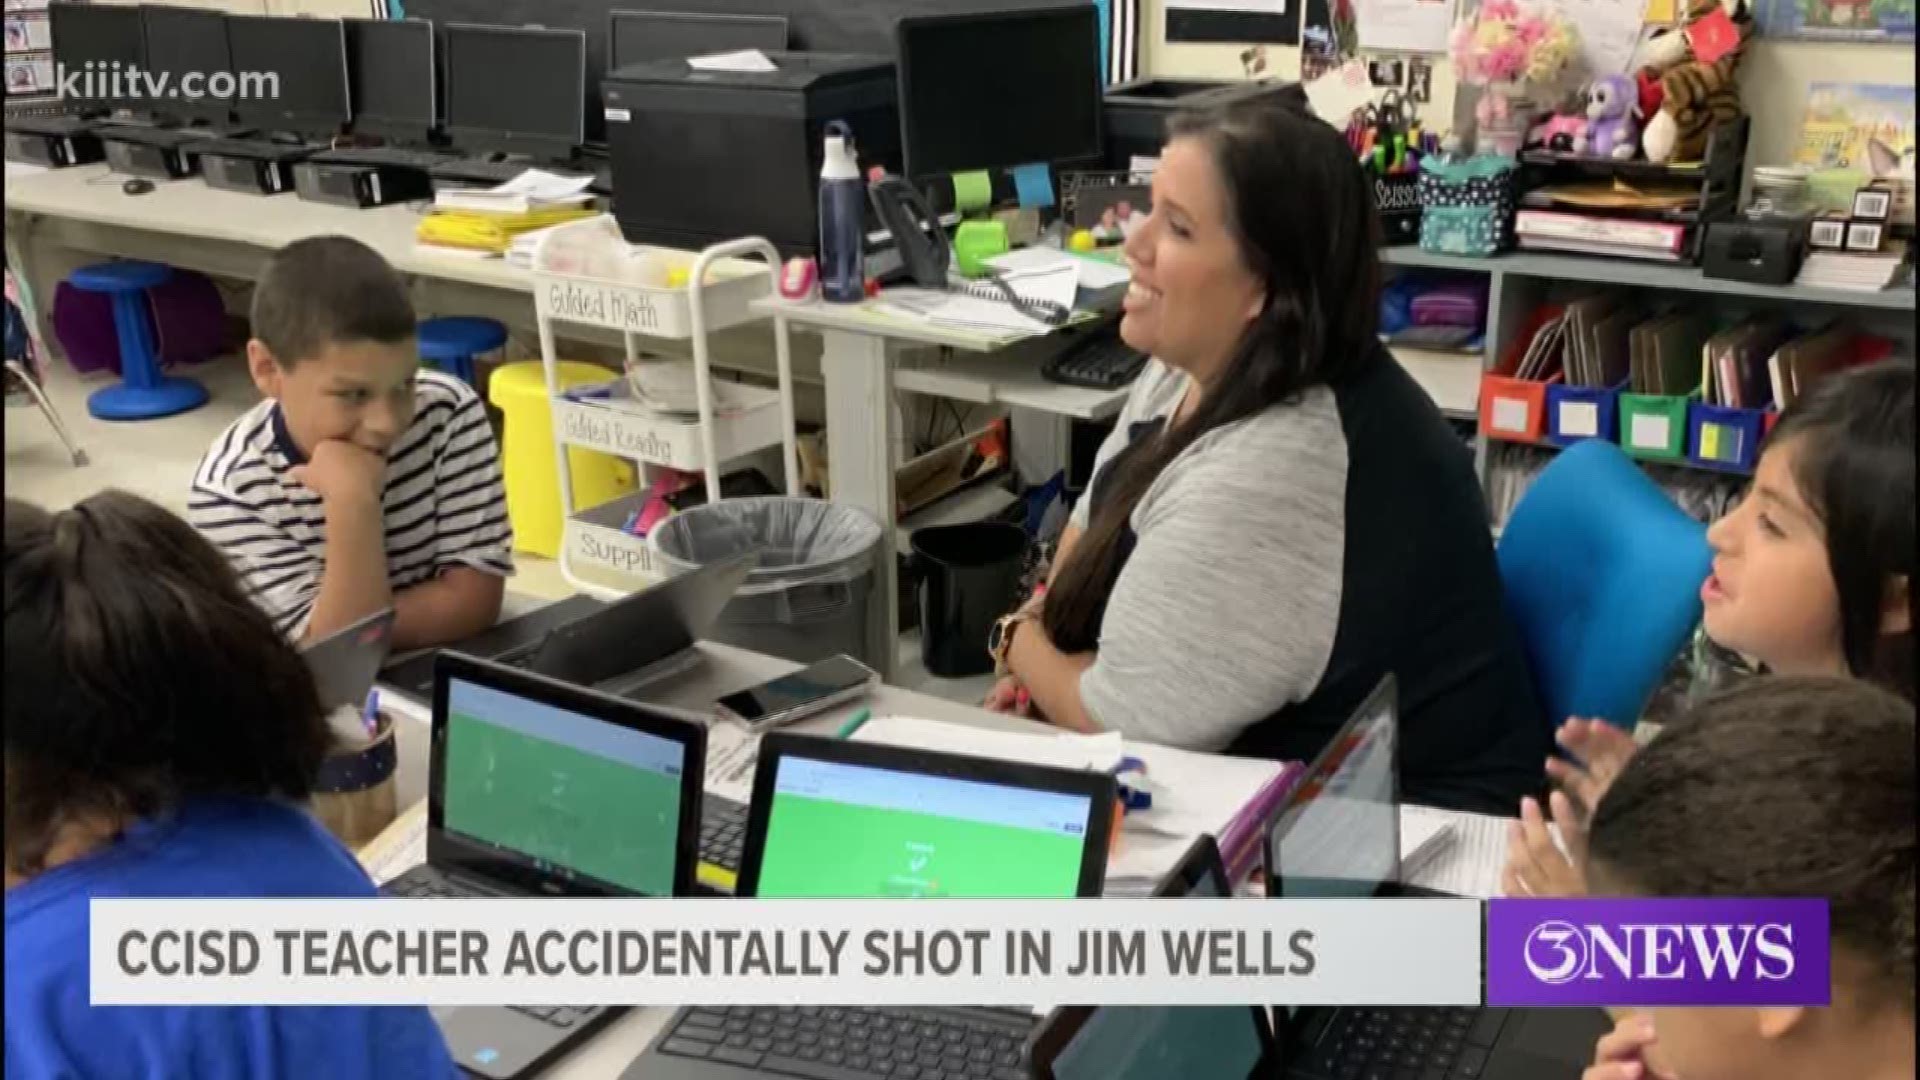 A teacher with the Corpus Christi Independent School District lost her life in a tragic accident Sunday while target shooting at a family ranch in Jim Wells County, according to investigators.